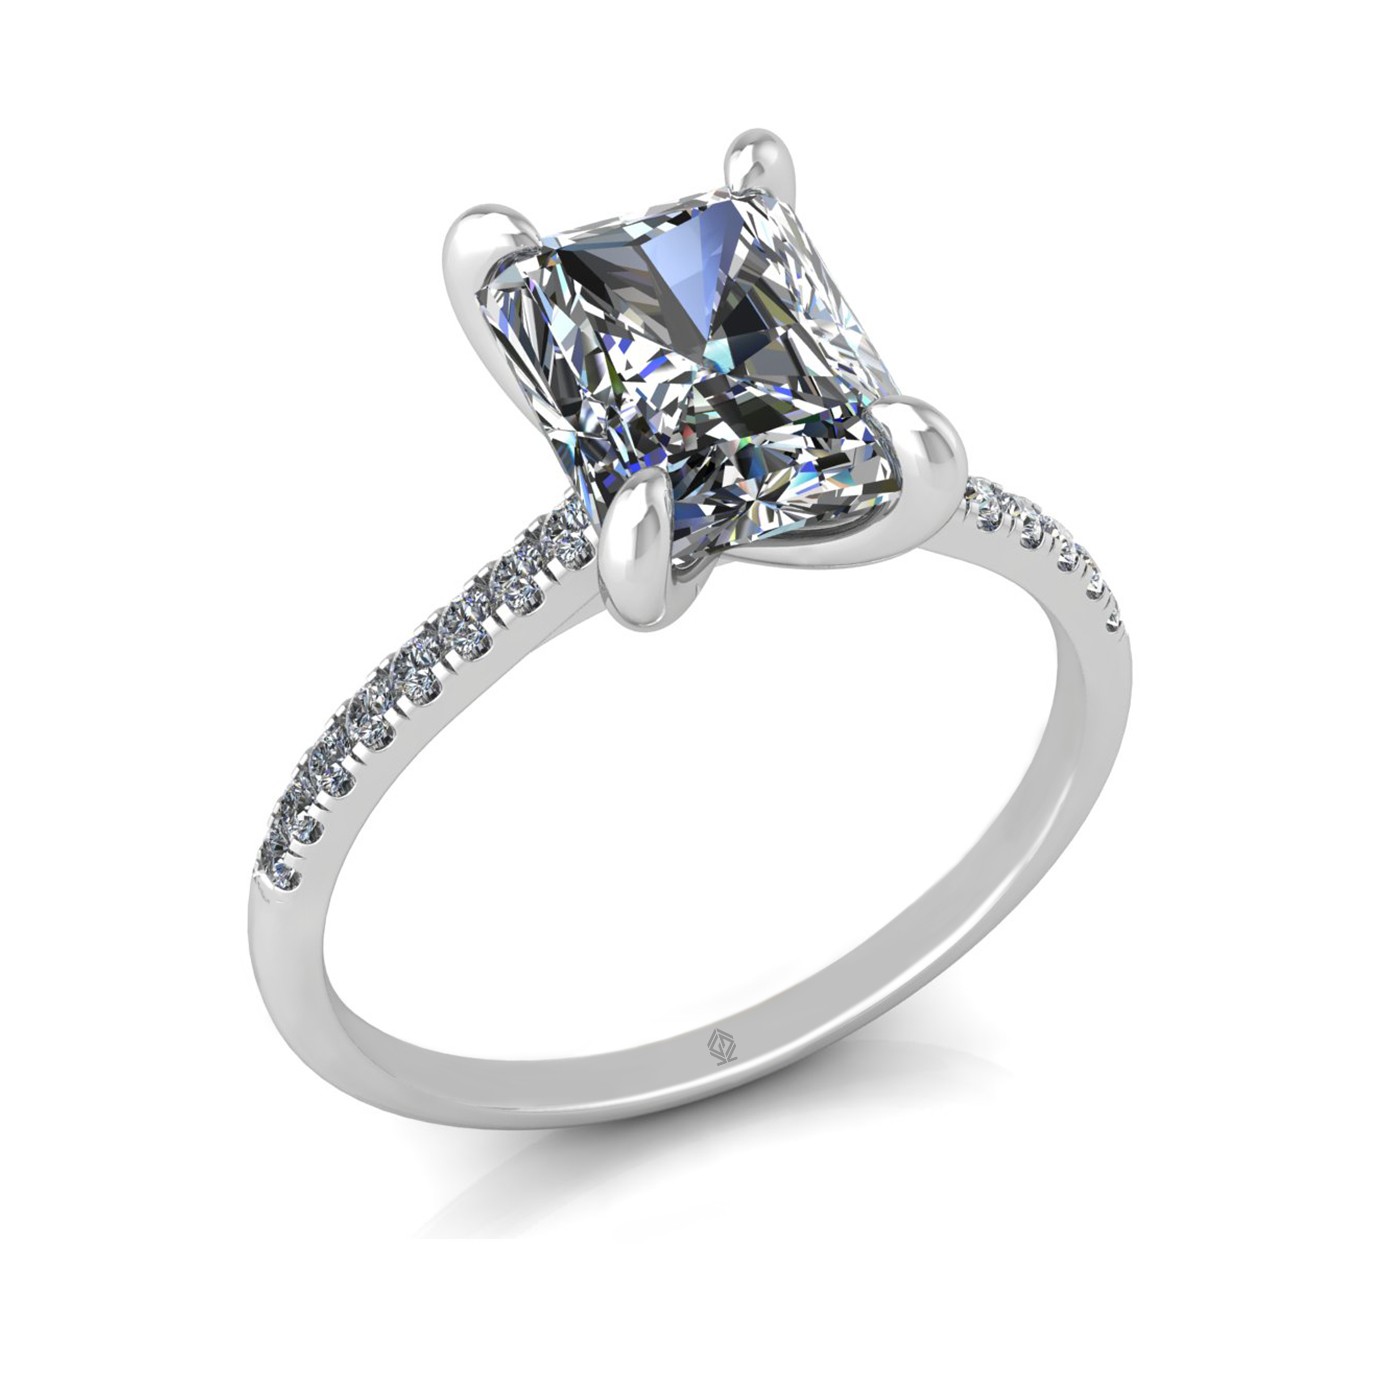 18k white gold  2,50 ct 4 prongs radiant cut diamond engagement ring with whisper thin pavÉ set band